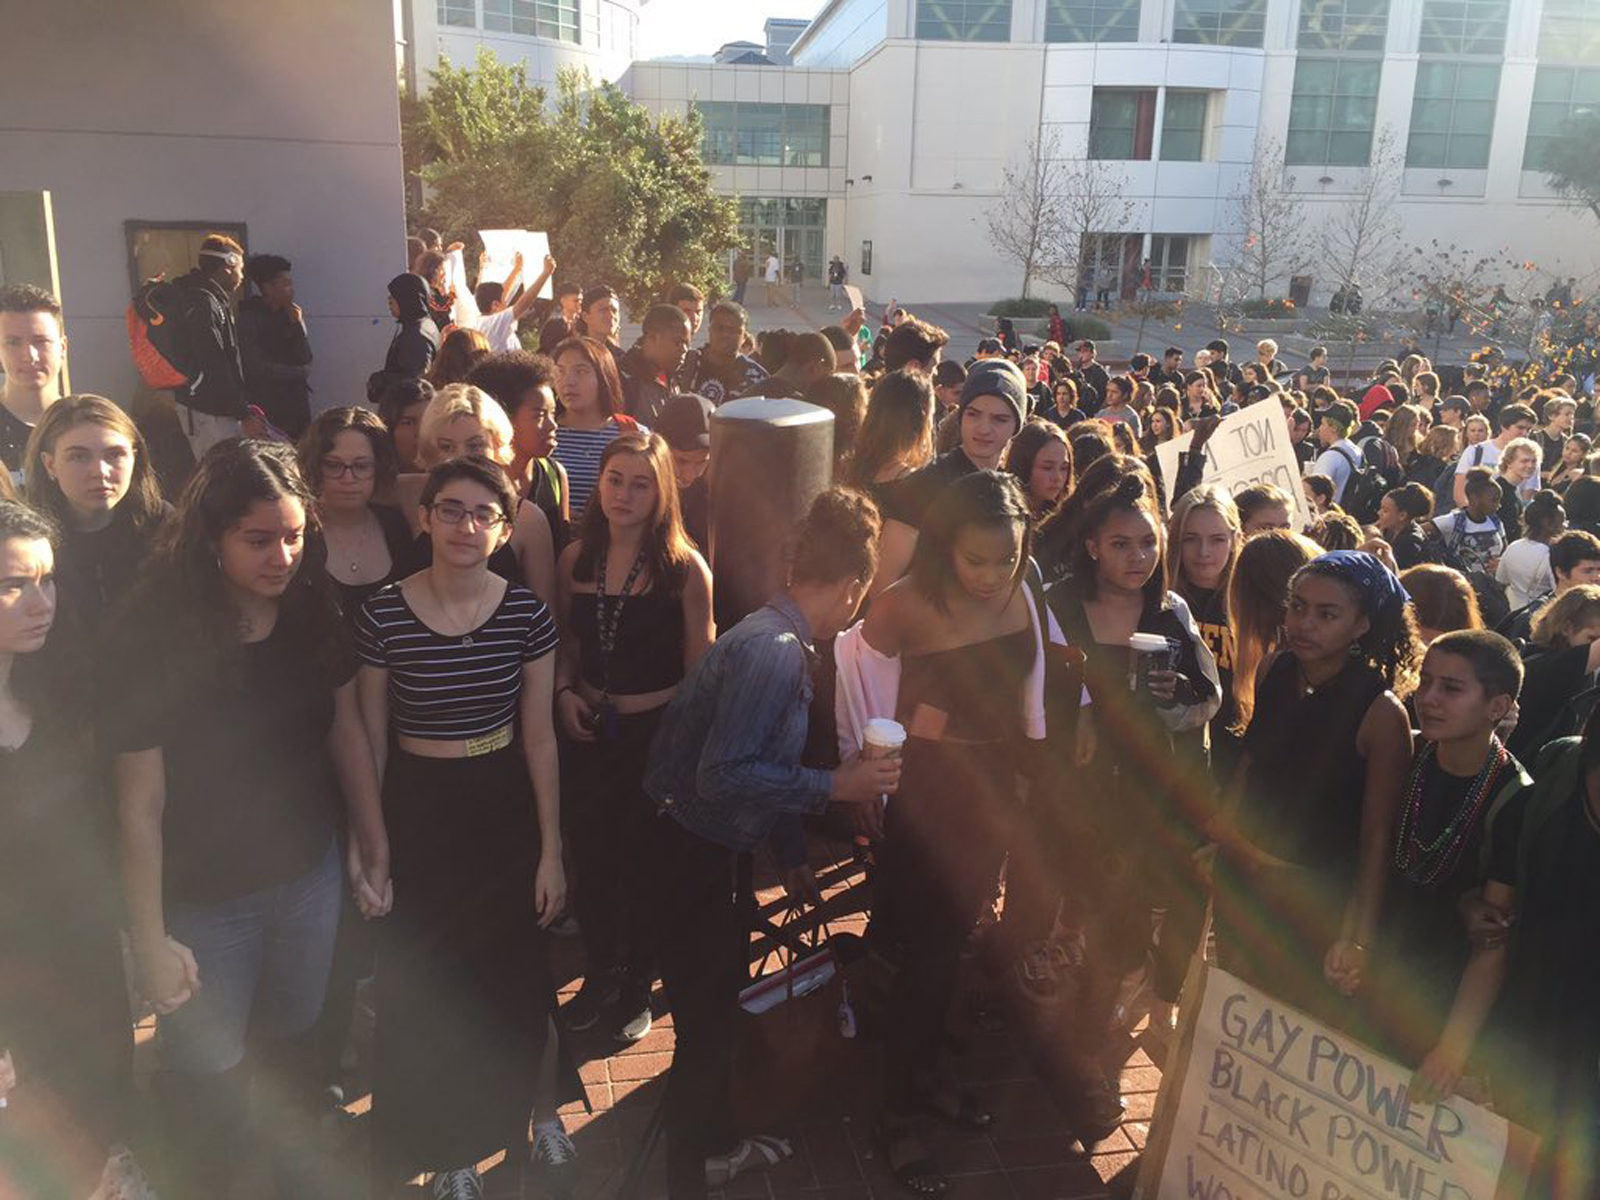 Lillian Weiner-Mock (third from left, in a striped top), co-head of the student body's Gay-Straight Alliance, stages a walk out with fellow students at Berkeley High School to protest against the presidential election of Donald Trump, in Berkeley, Calif., on Nov. 9, 2016. (Courtesy of Berkeley High School)